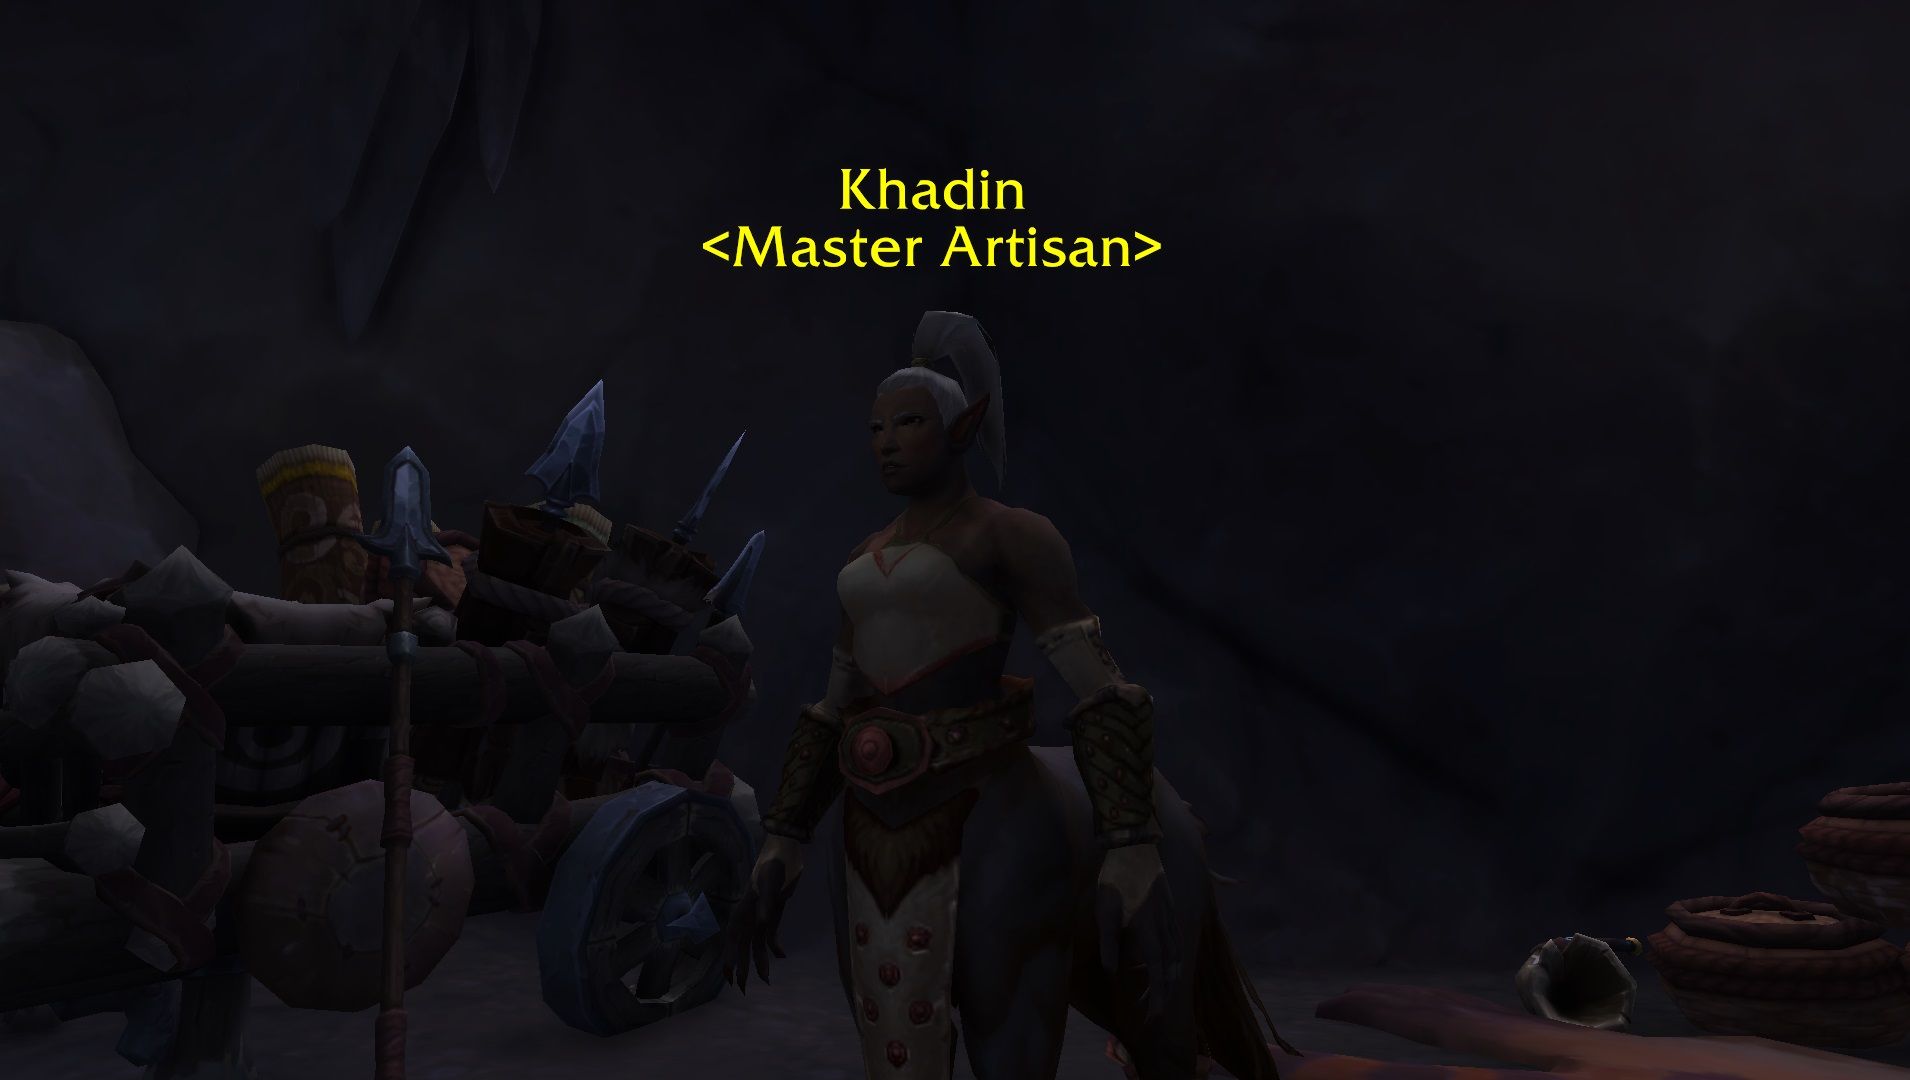 Khadin, the Master Artisan, in Khadin's Cave in World of Warcraft.